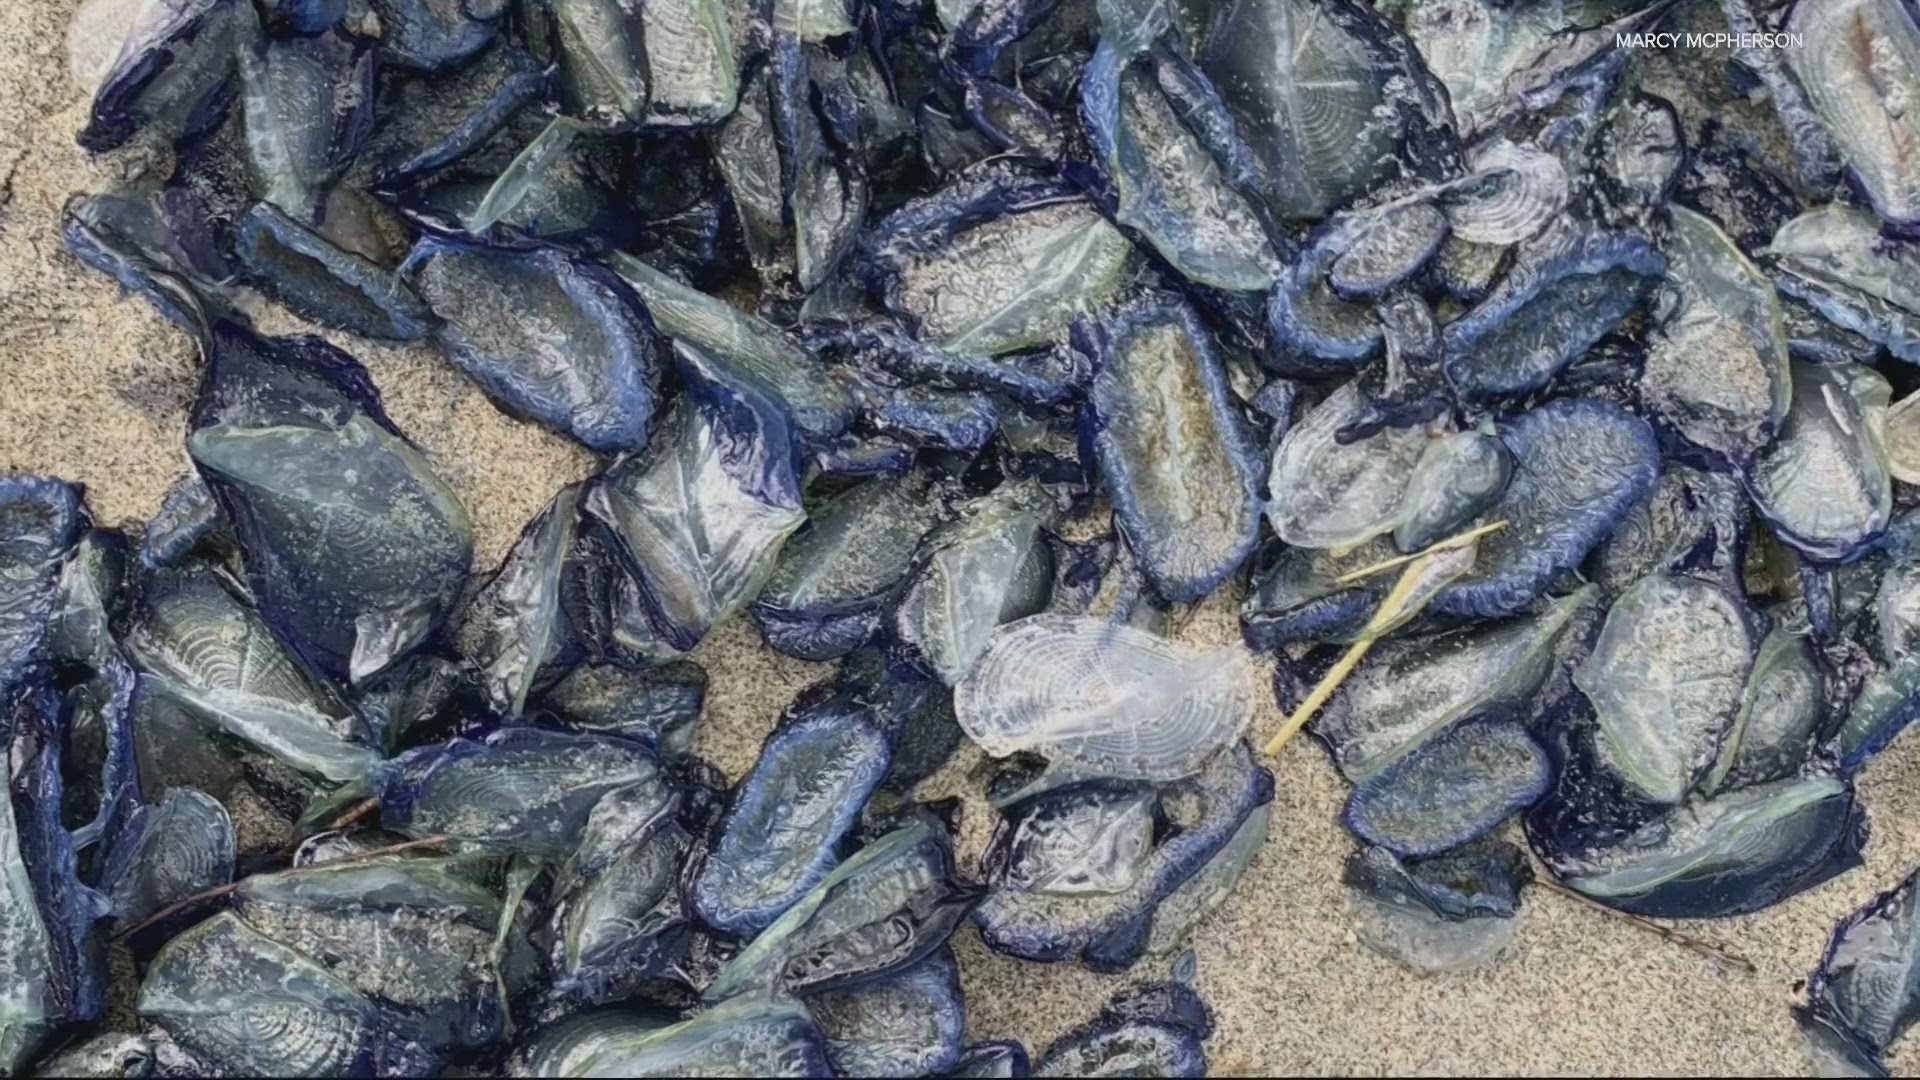 The piles of blue sea creatures have been a startling sight for recent Oregon beachgoers, but they're not dangerous, and their arrival is a fairly routine event.